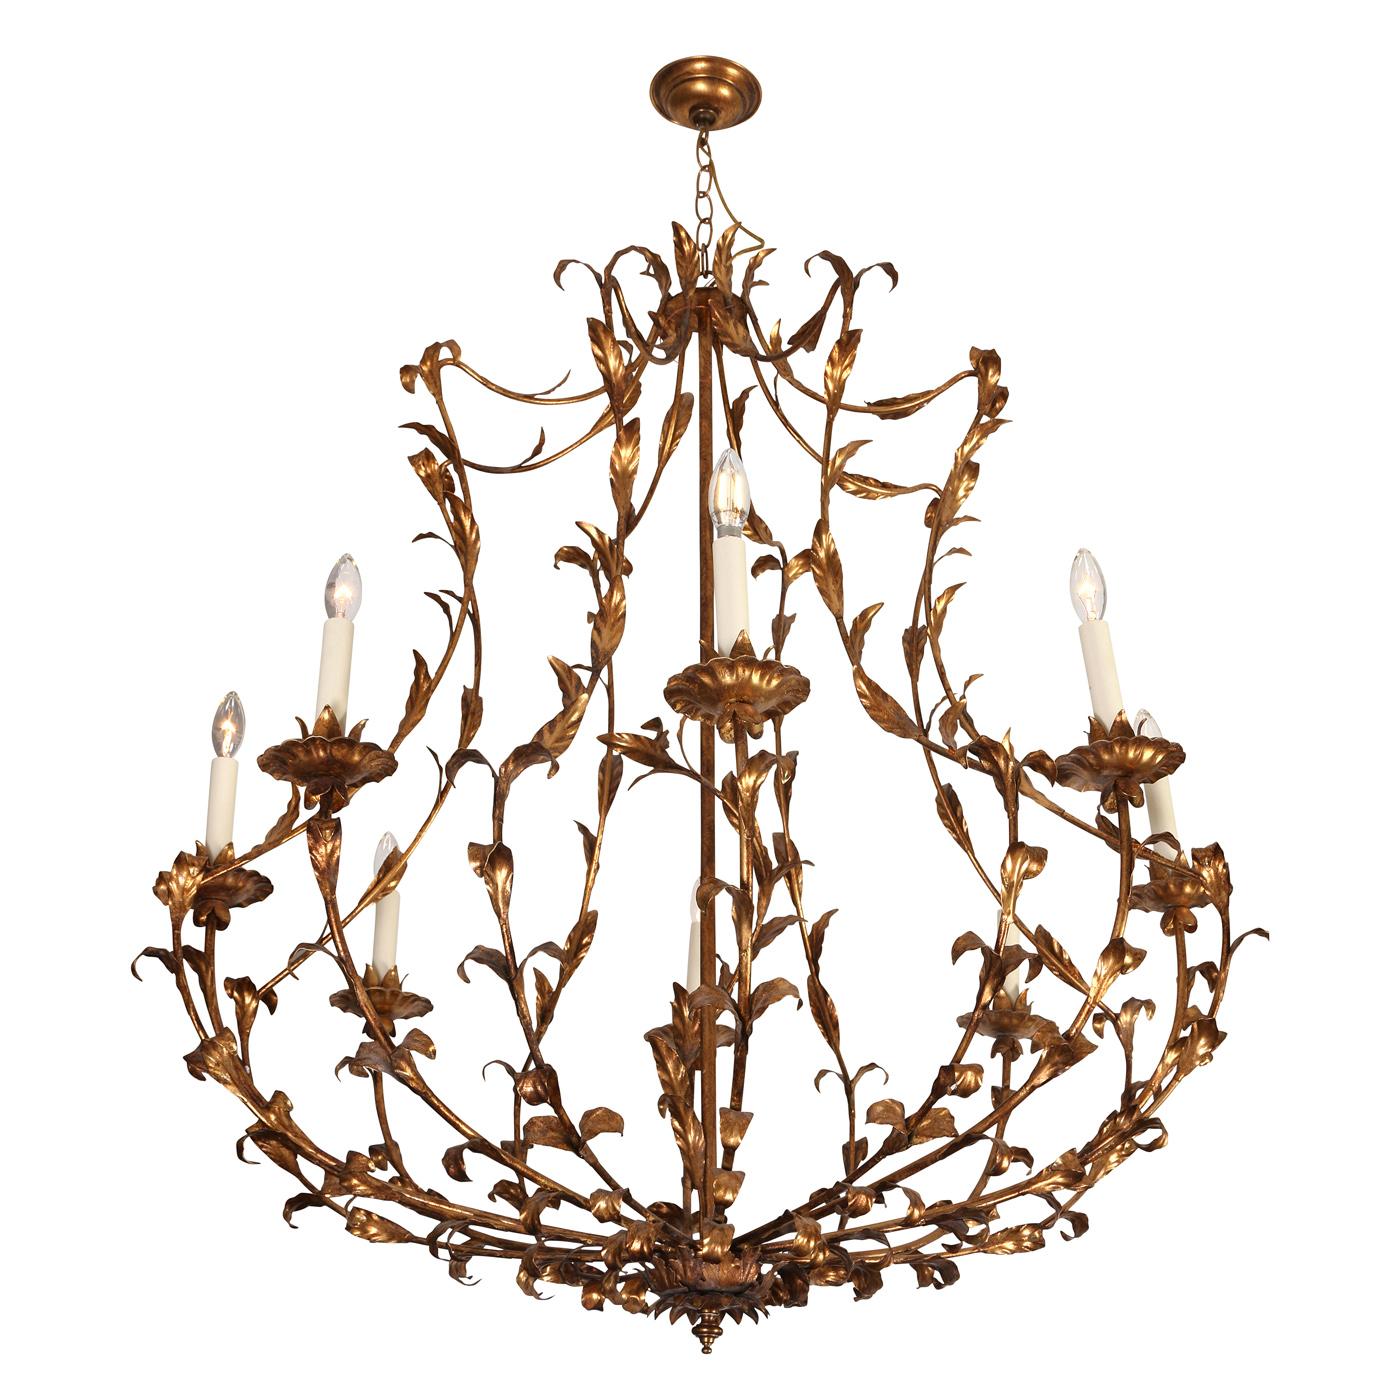 Although this fantastic chandelier is large in scale, its open design gives it a light, airy feeling.  The fixture is composed of eight arms, each with a floral shaped bobeche supporting the lights.. The fanciful frame consists of a scrolling leaf